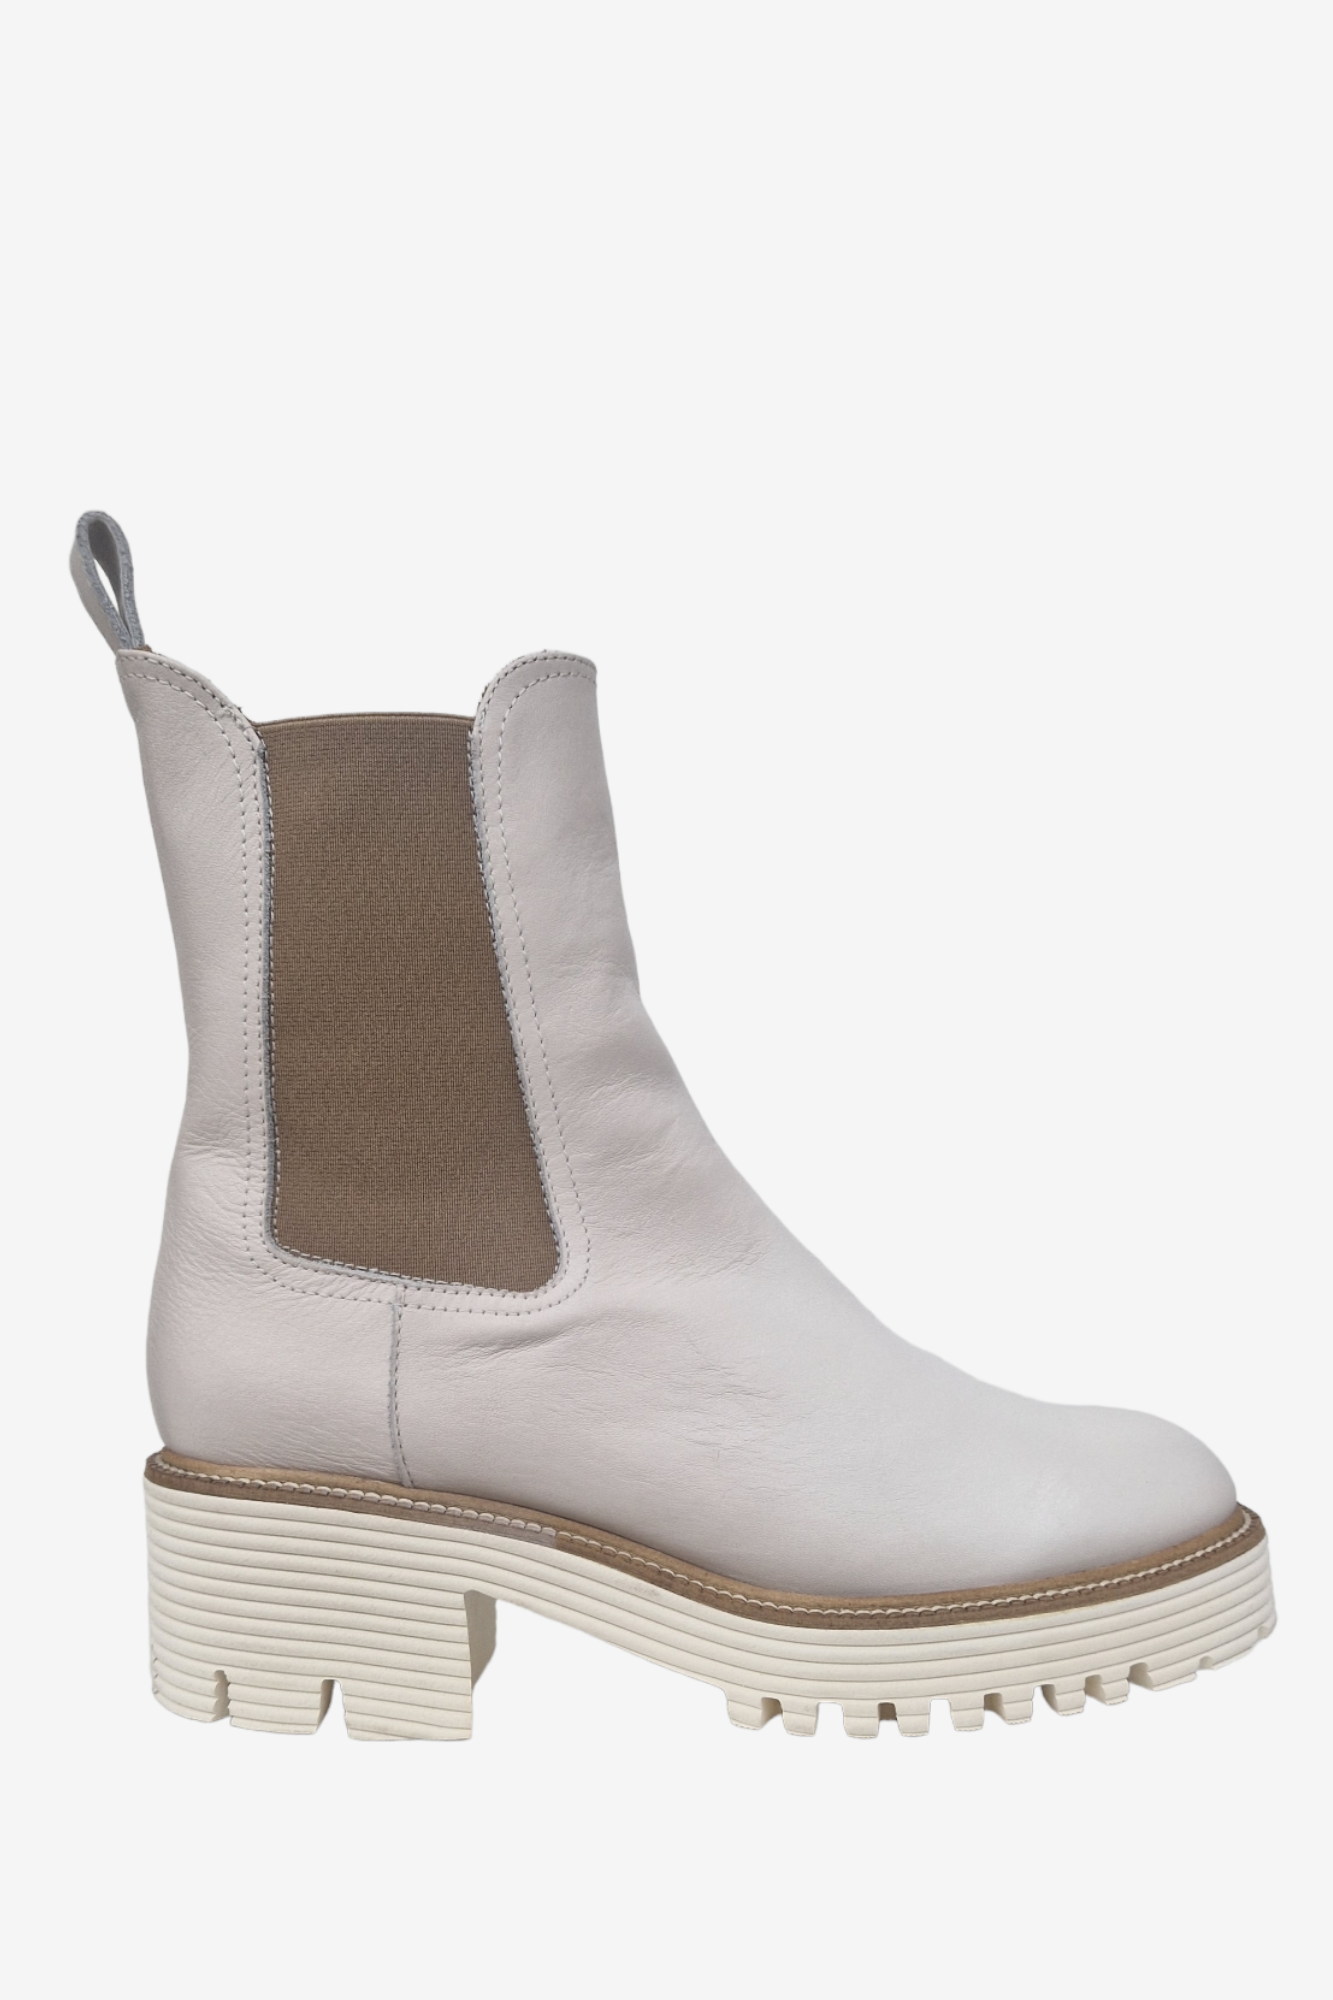 MARIAN 42401 CREAM LEATHER CHELSEA BOOTS